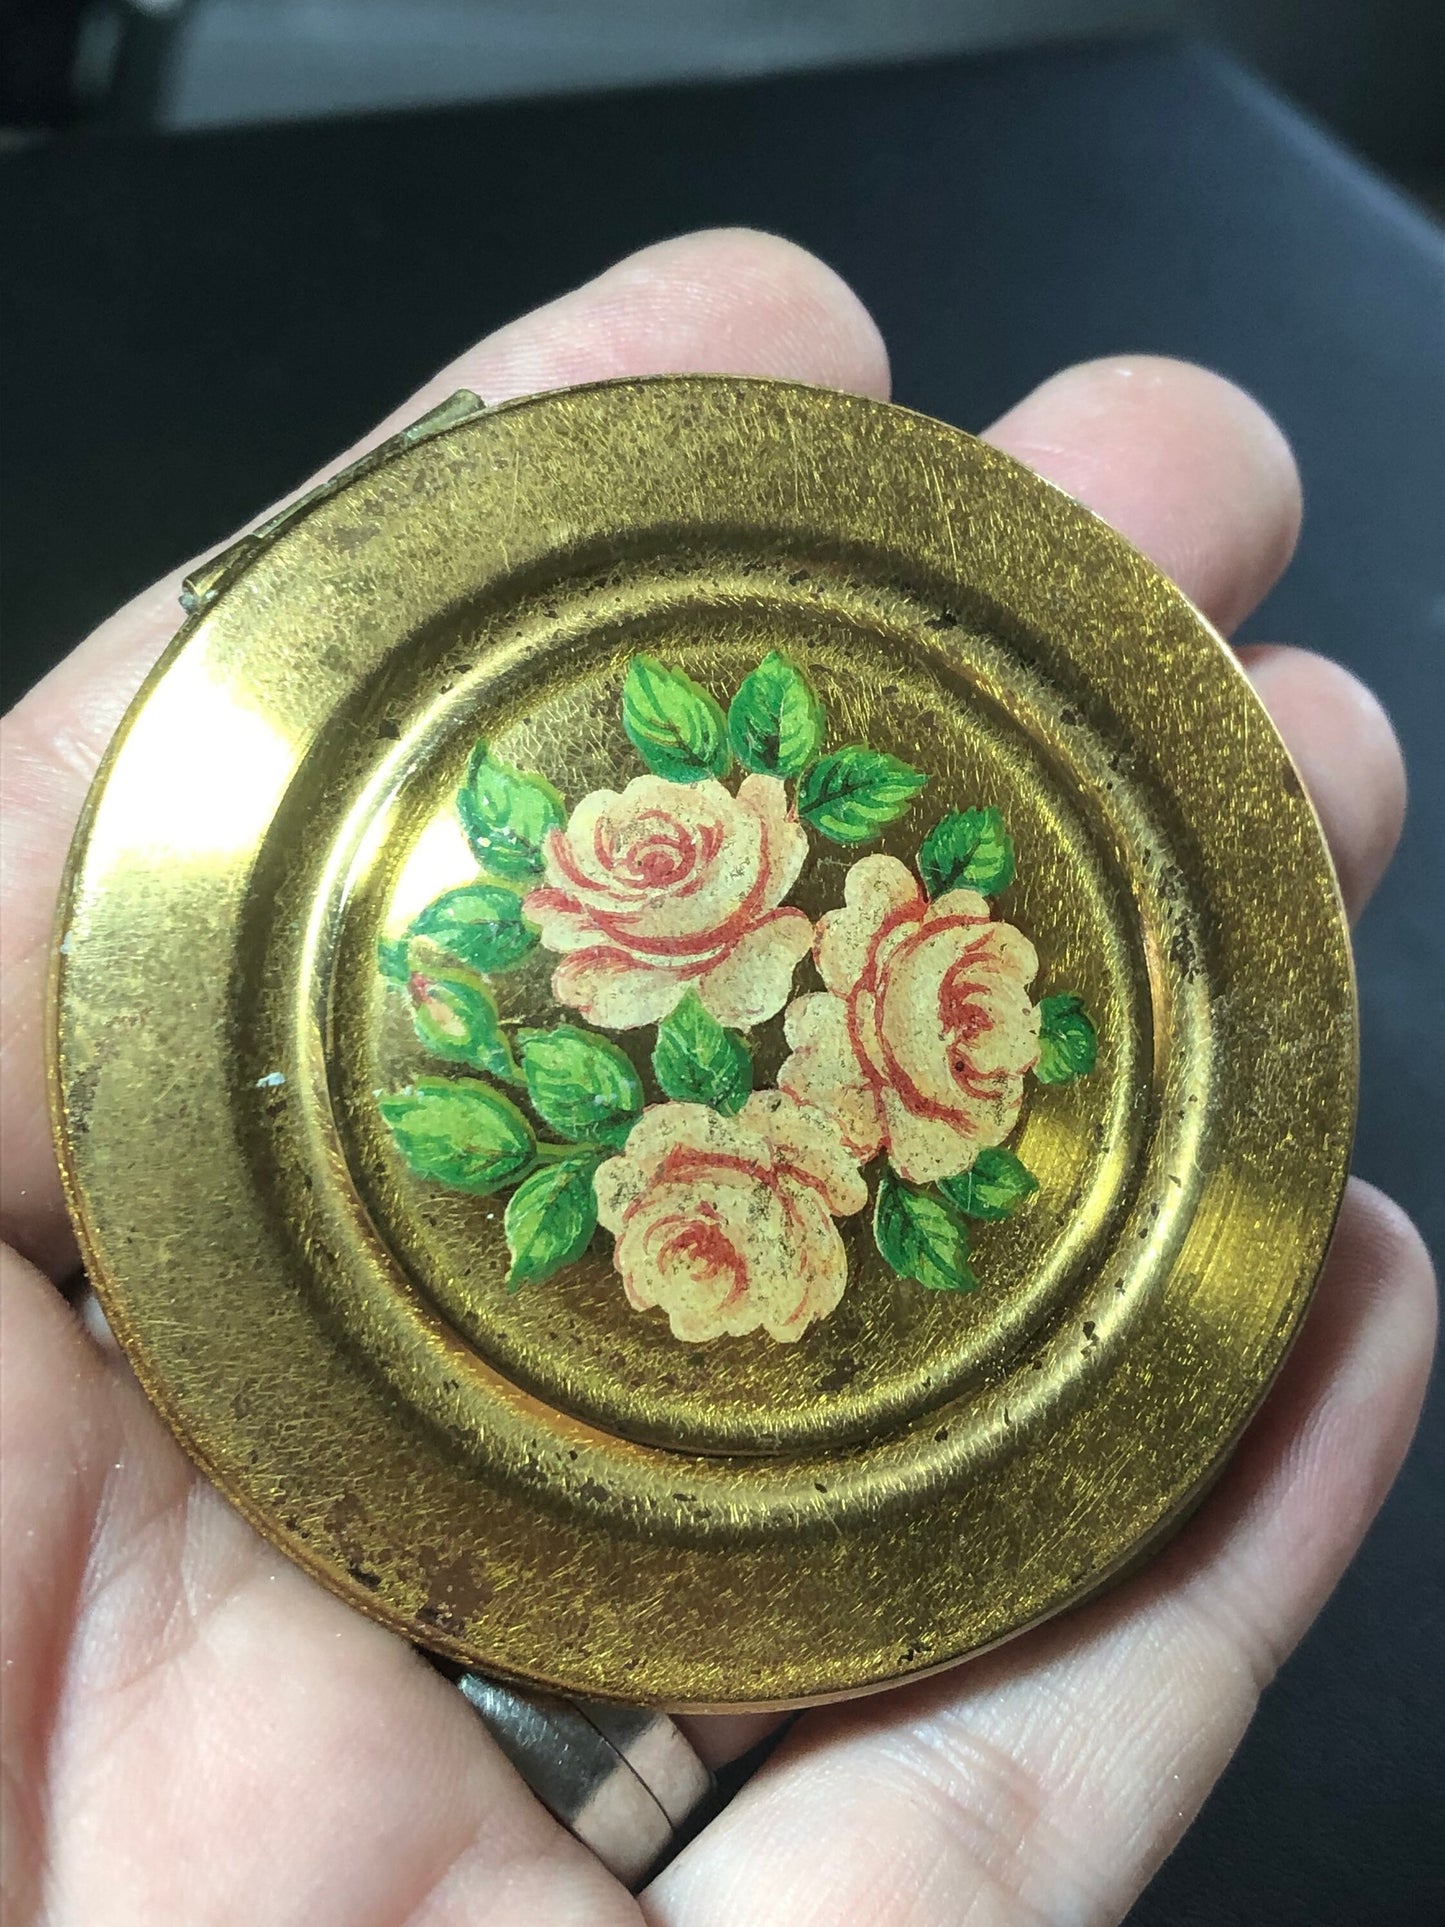 Vintage retro gold tone KIGU pink roses floral painted brass powder compact mirror compact with sifter